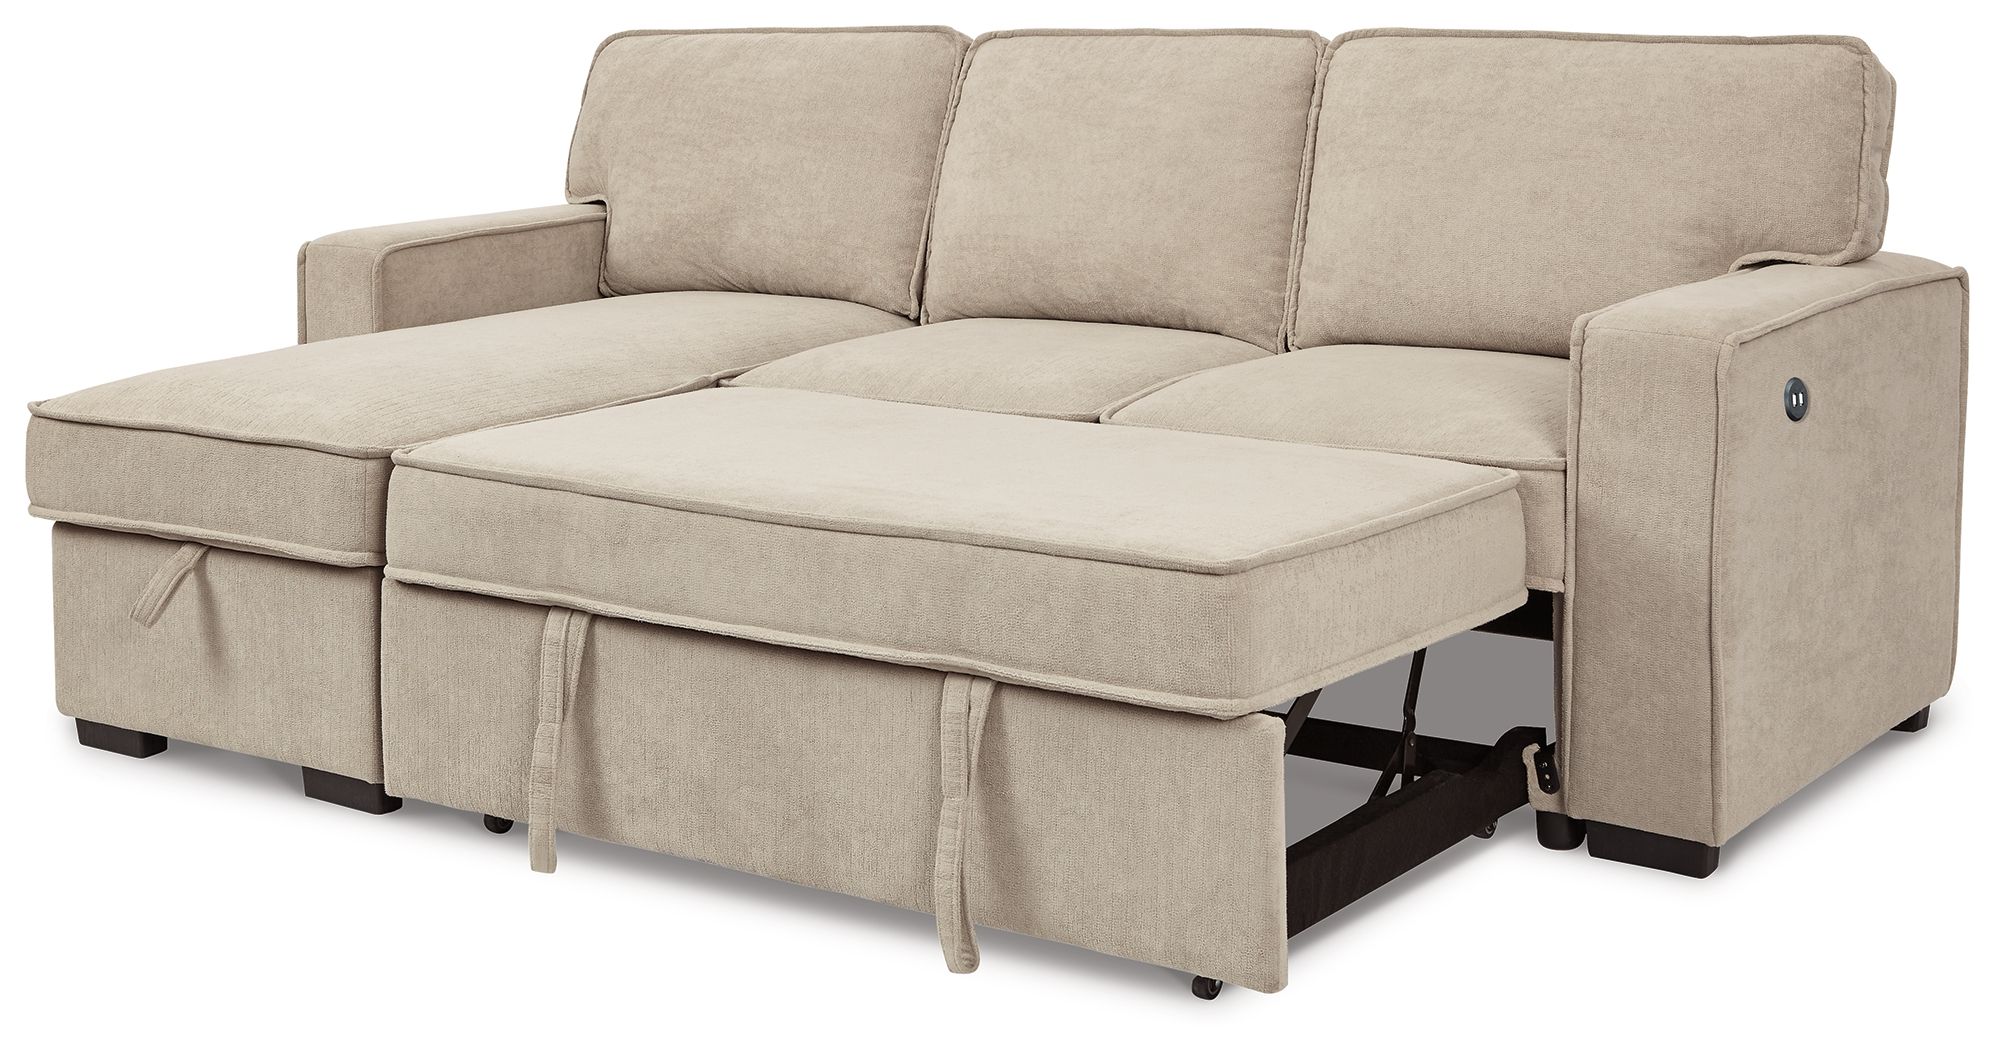 Darton 2 Piece Sleeper Sectional With Storage 73506s1signature Regarding Left Or Right Facing Sleeper Sectionals (View 5 of 21)